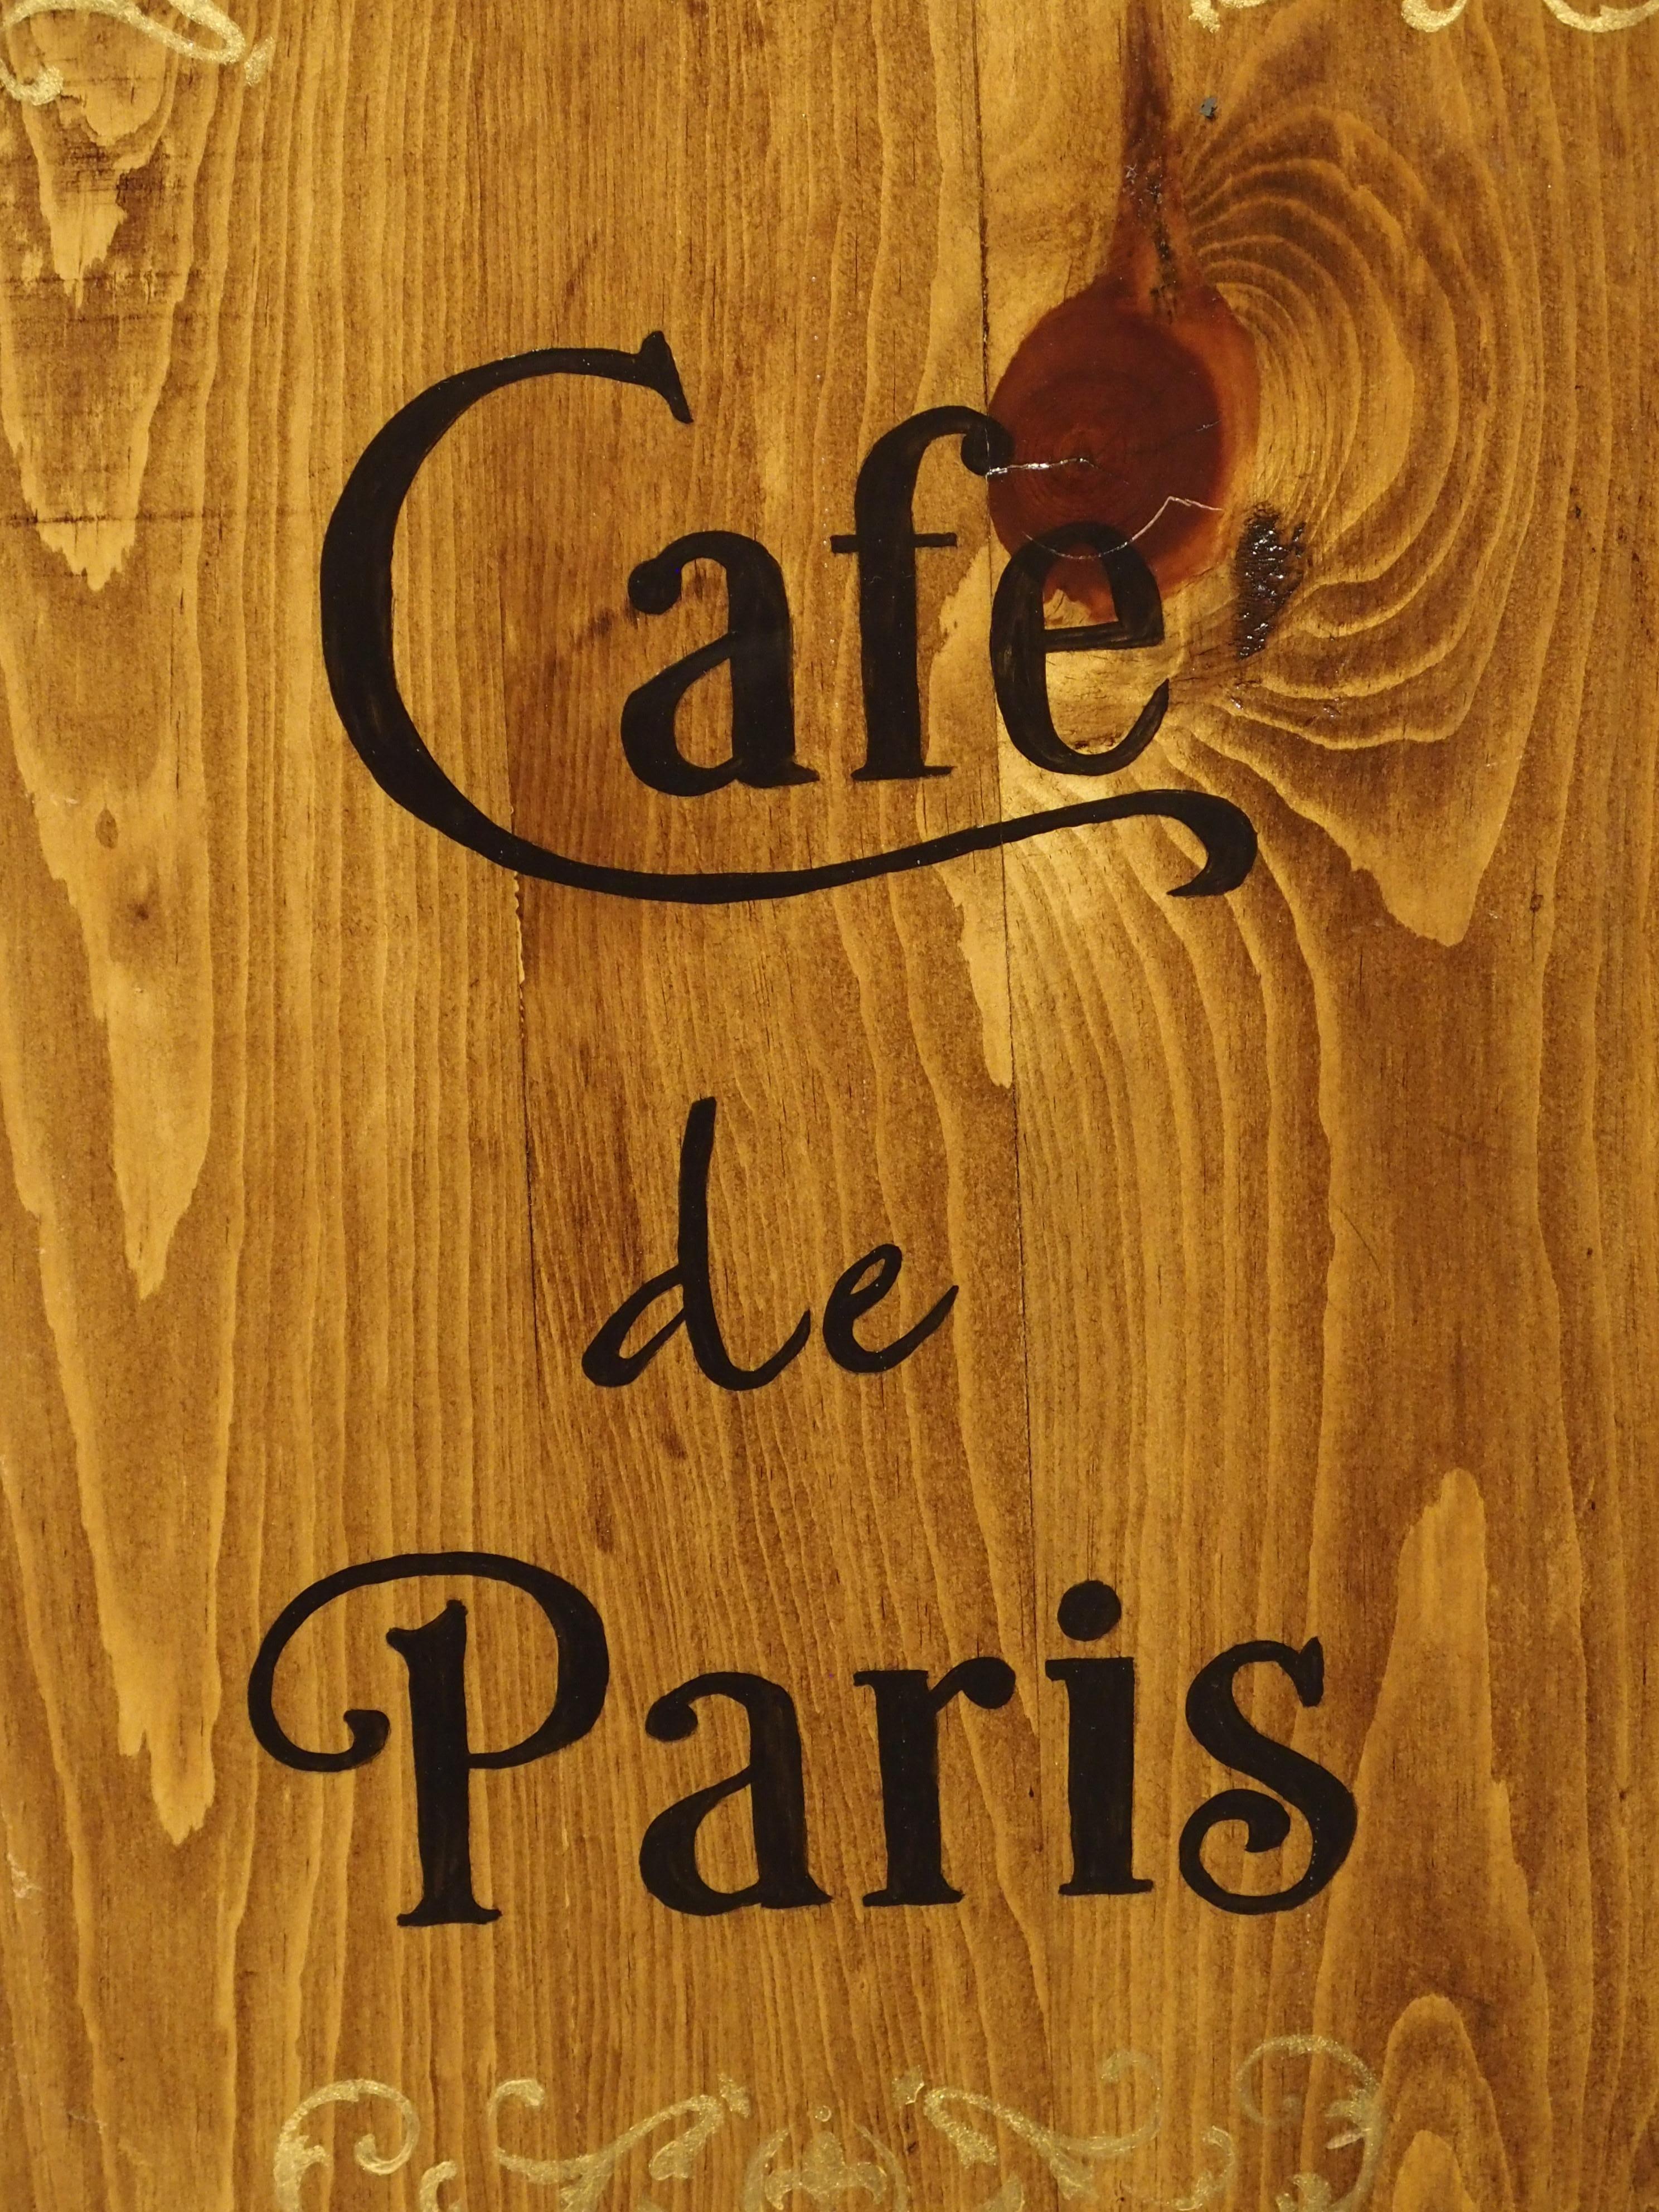 Contemporary “Cafe de Paris” Hand Painted Wooden Cheese Board